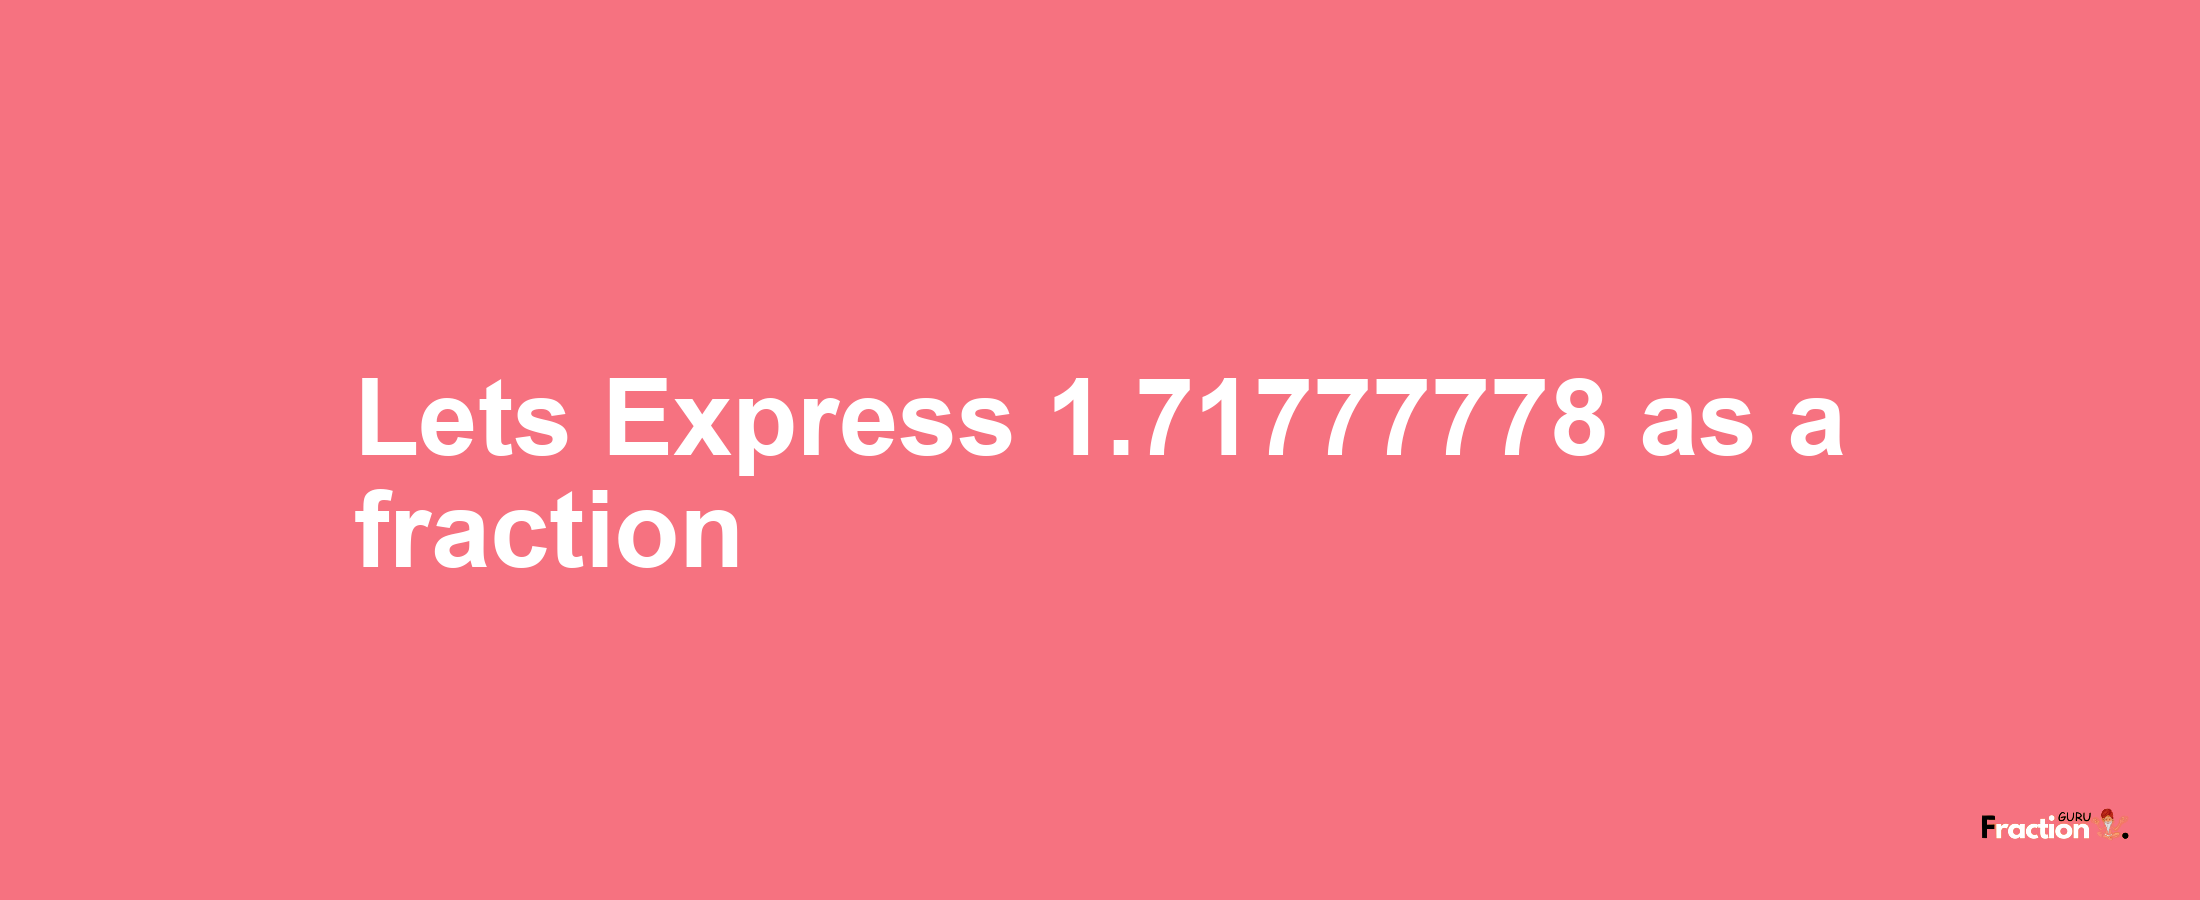 Lets Express 1.71777778 as afraction